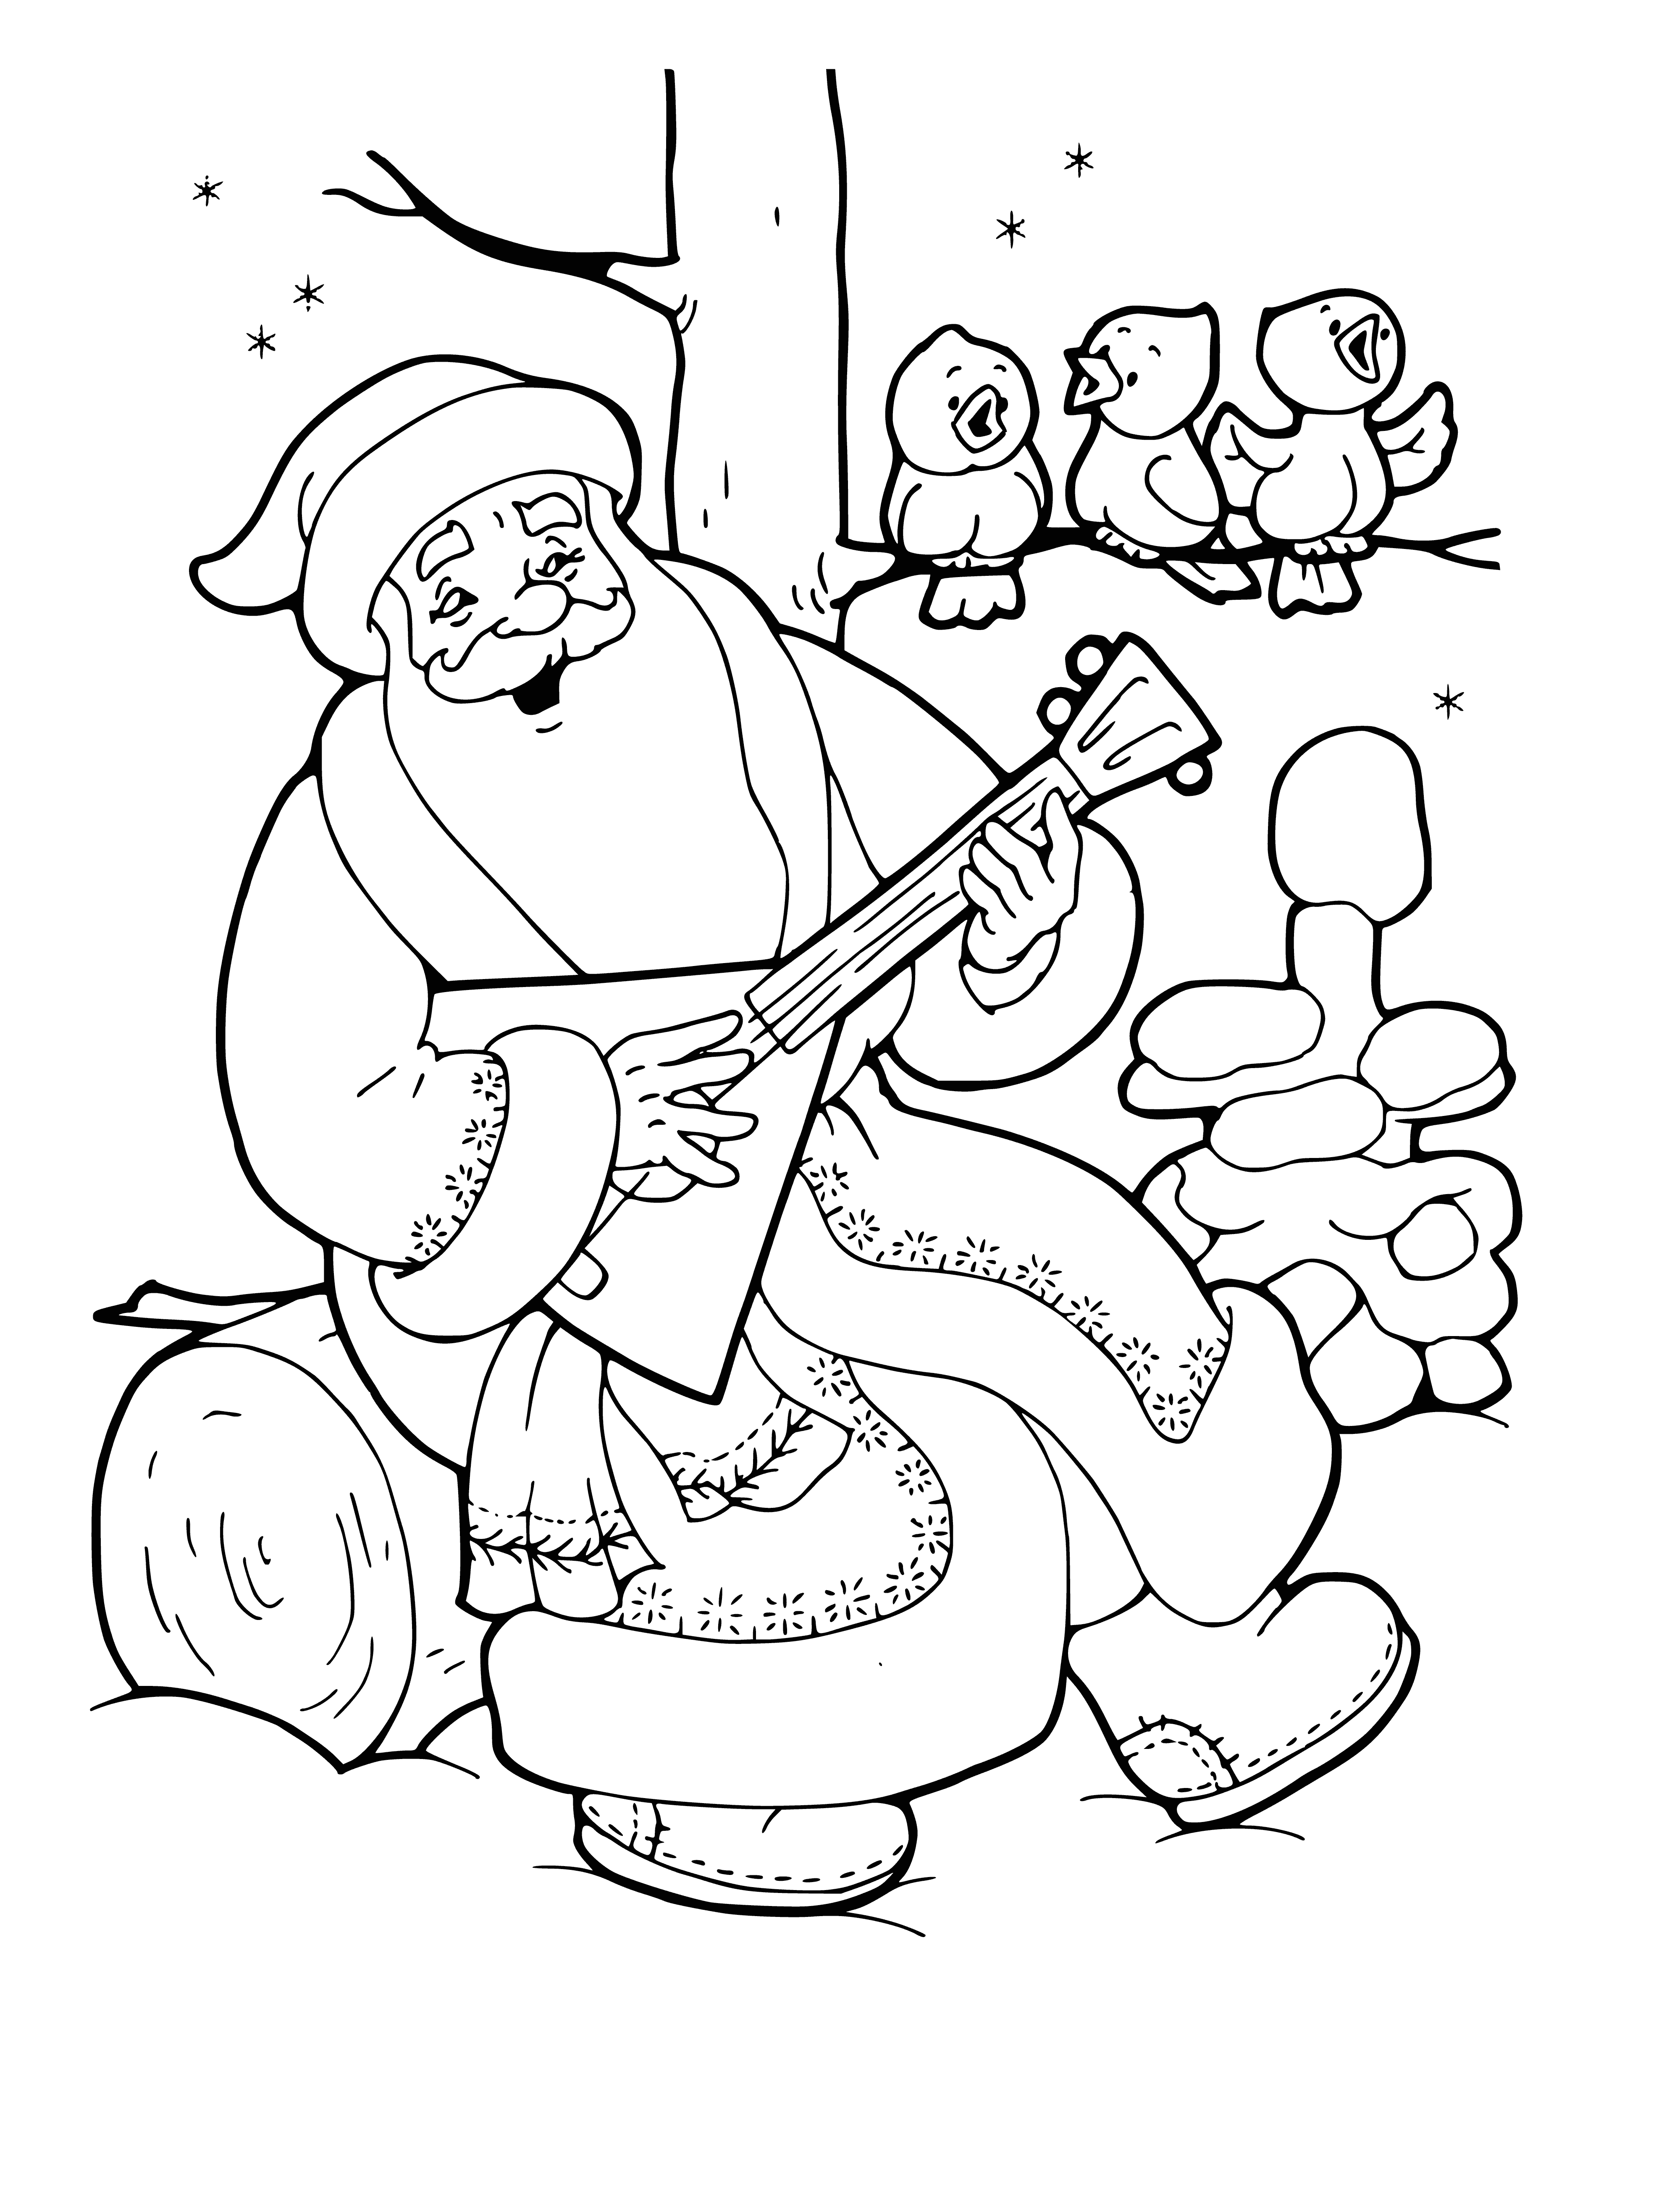 Santa Claus plays balalaika in a red suit & hat, white beard - a jolly scene for holiday coloring! #coloring #SantaClaus